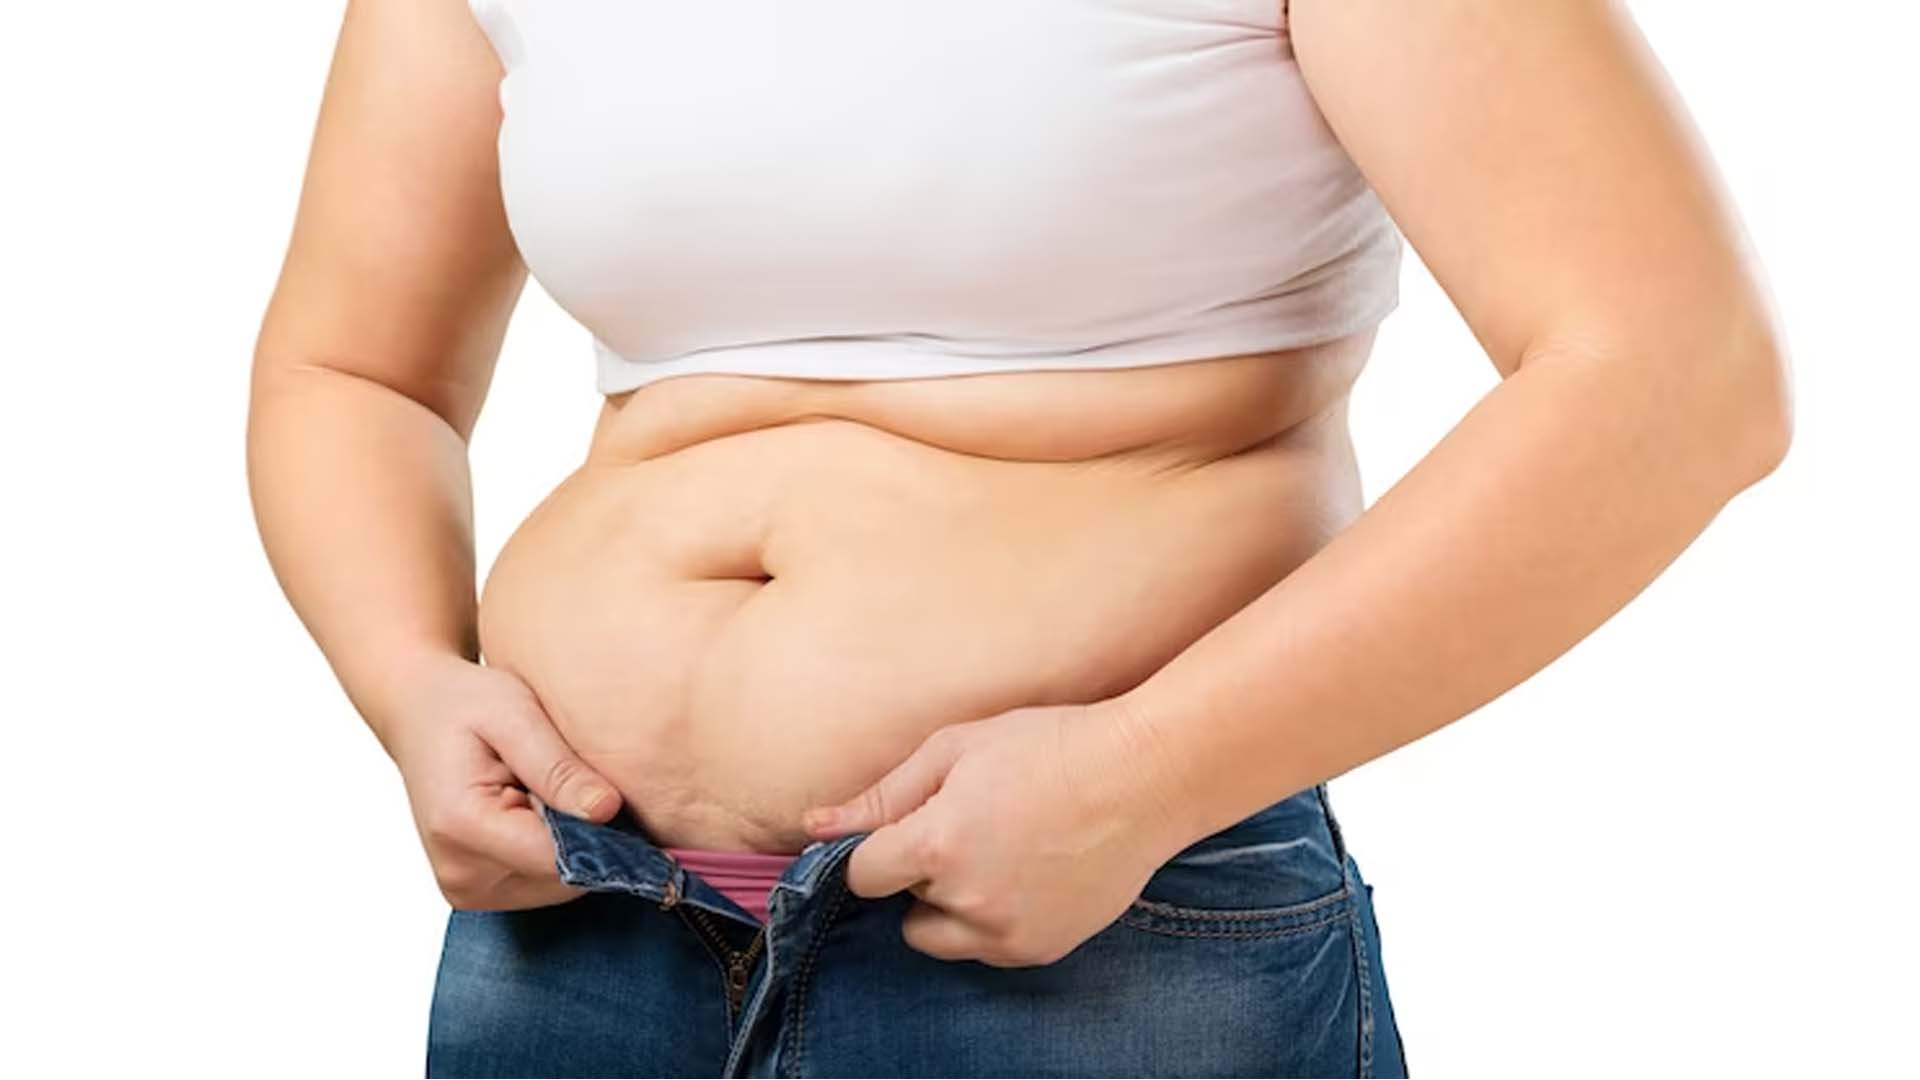 Causes of Big Stomach in Females